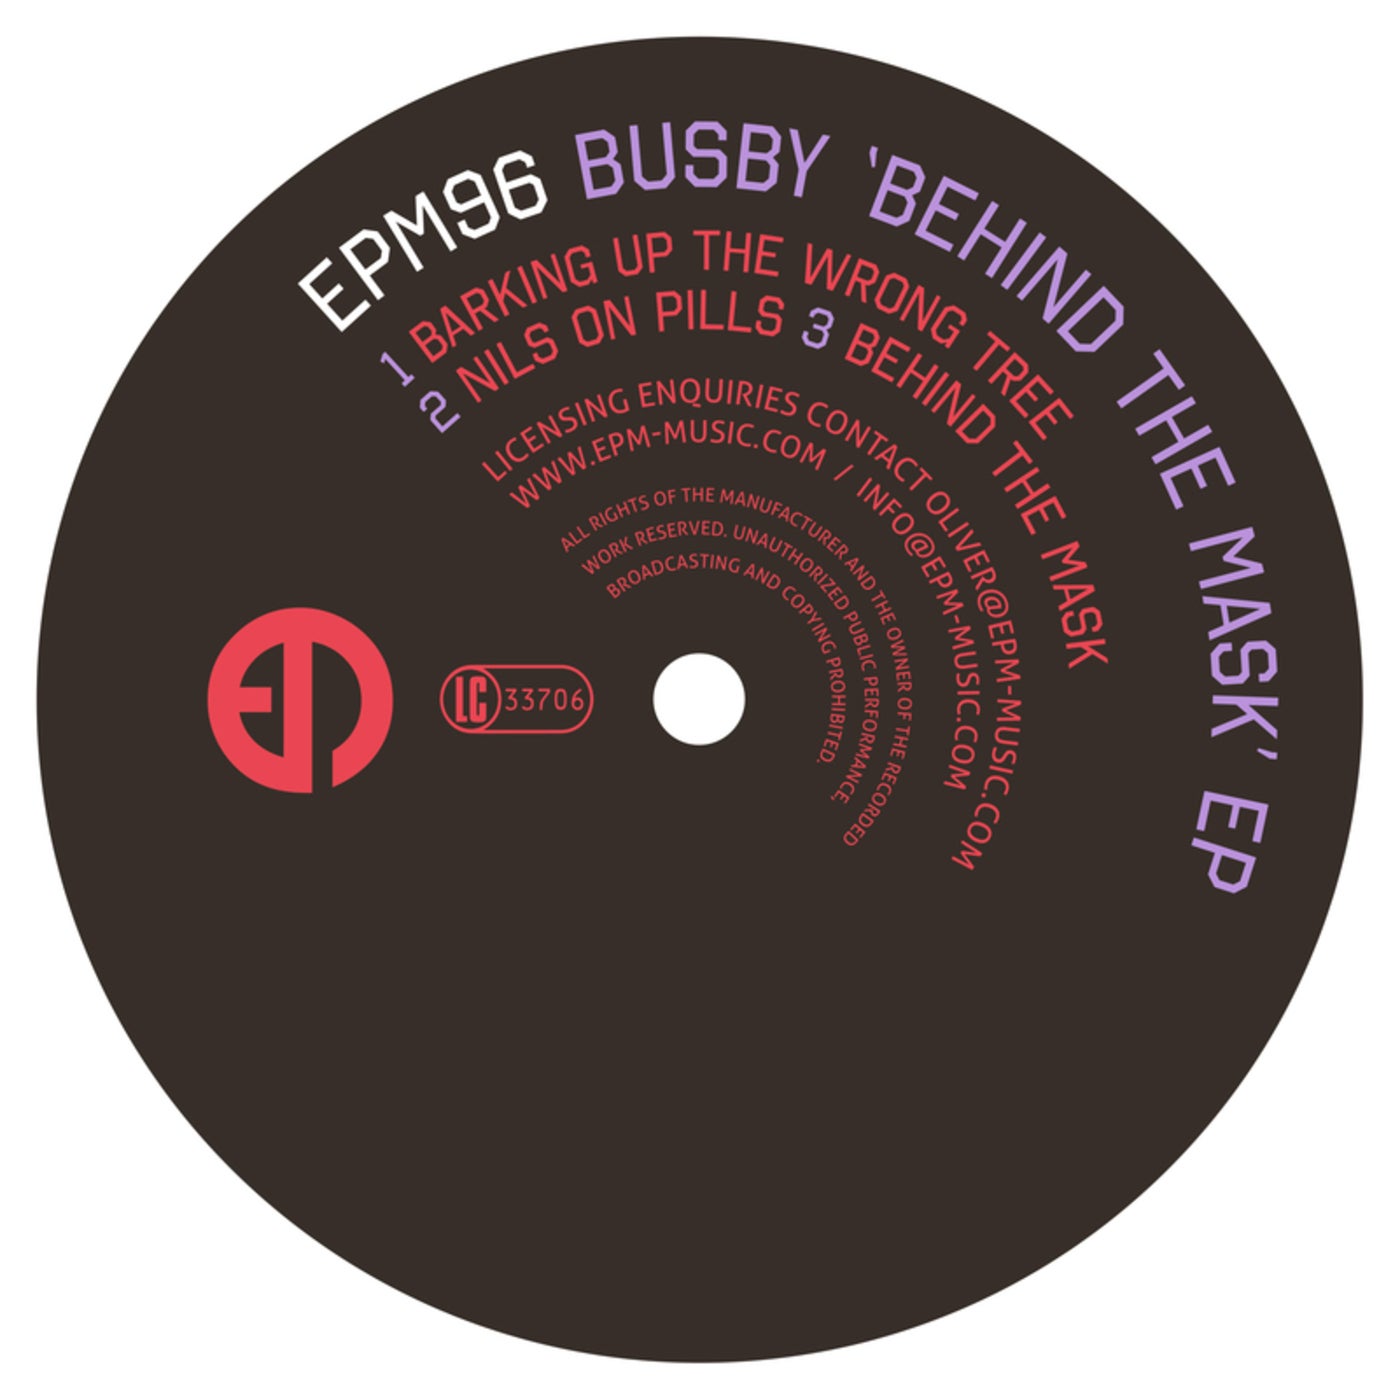 Busby - Behind the Mask EP [EPM96]